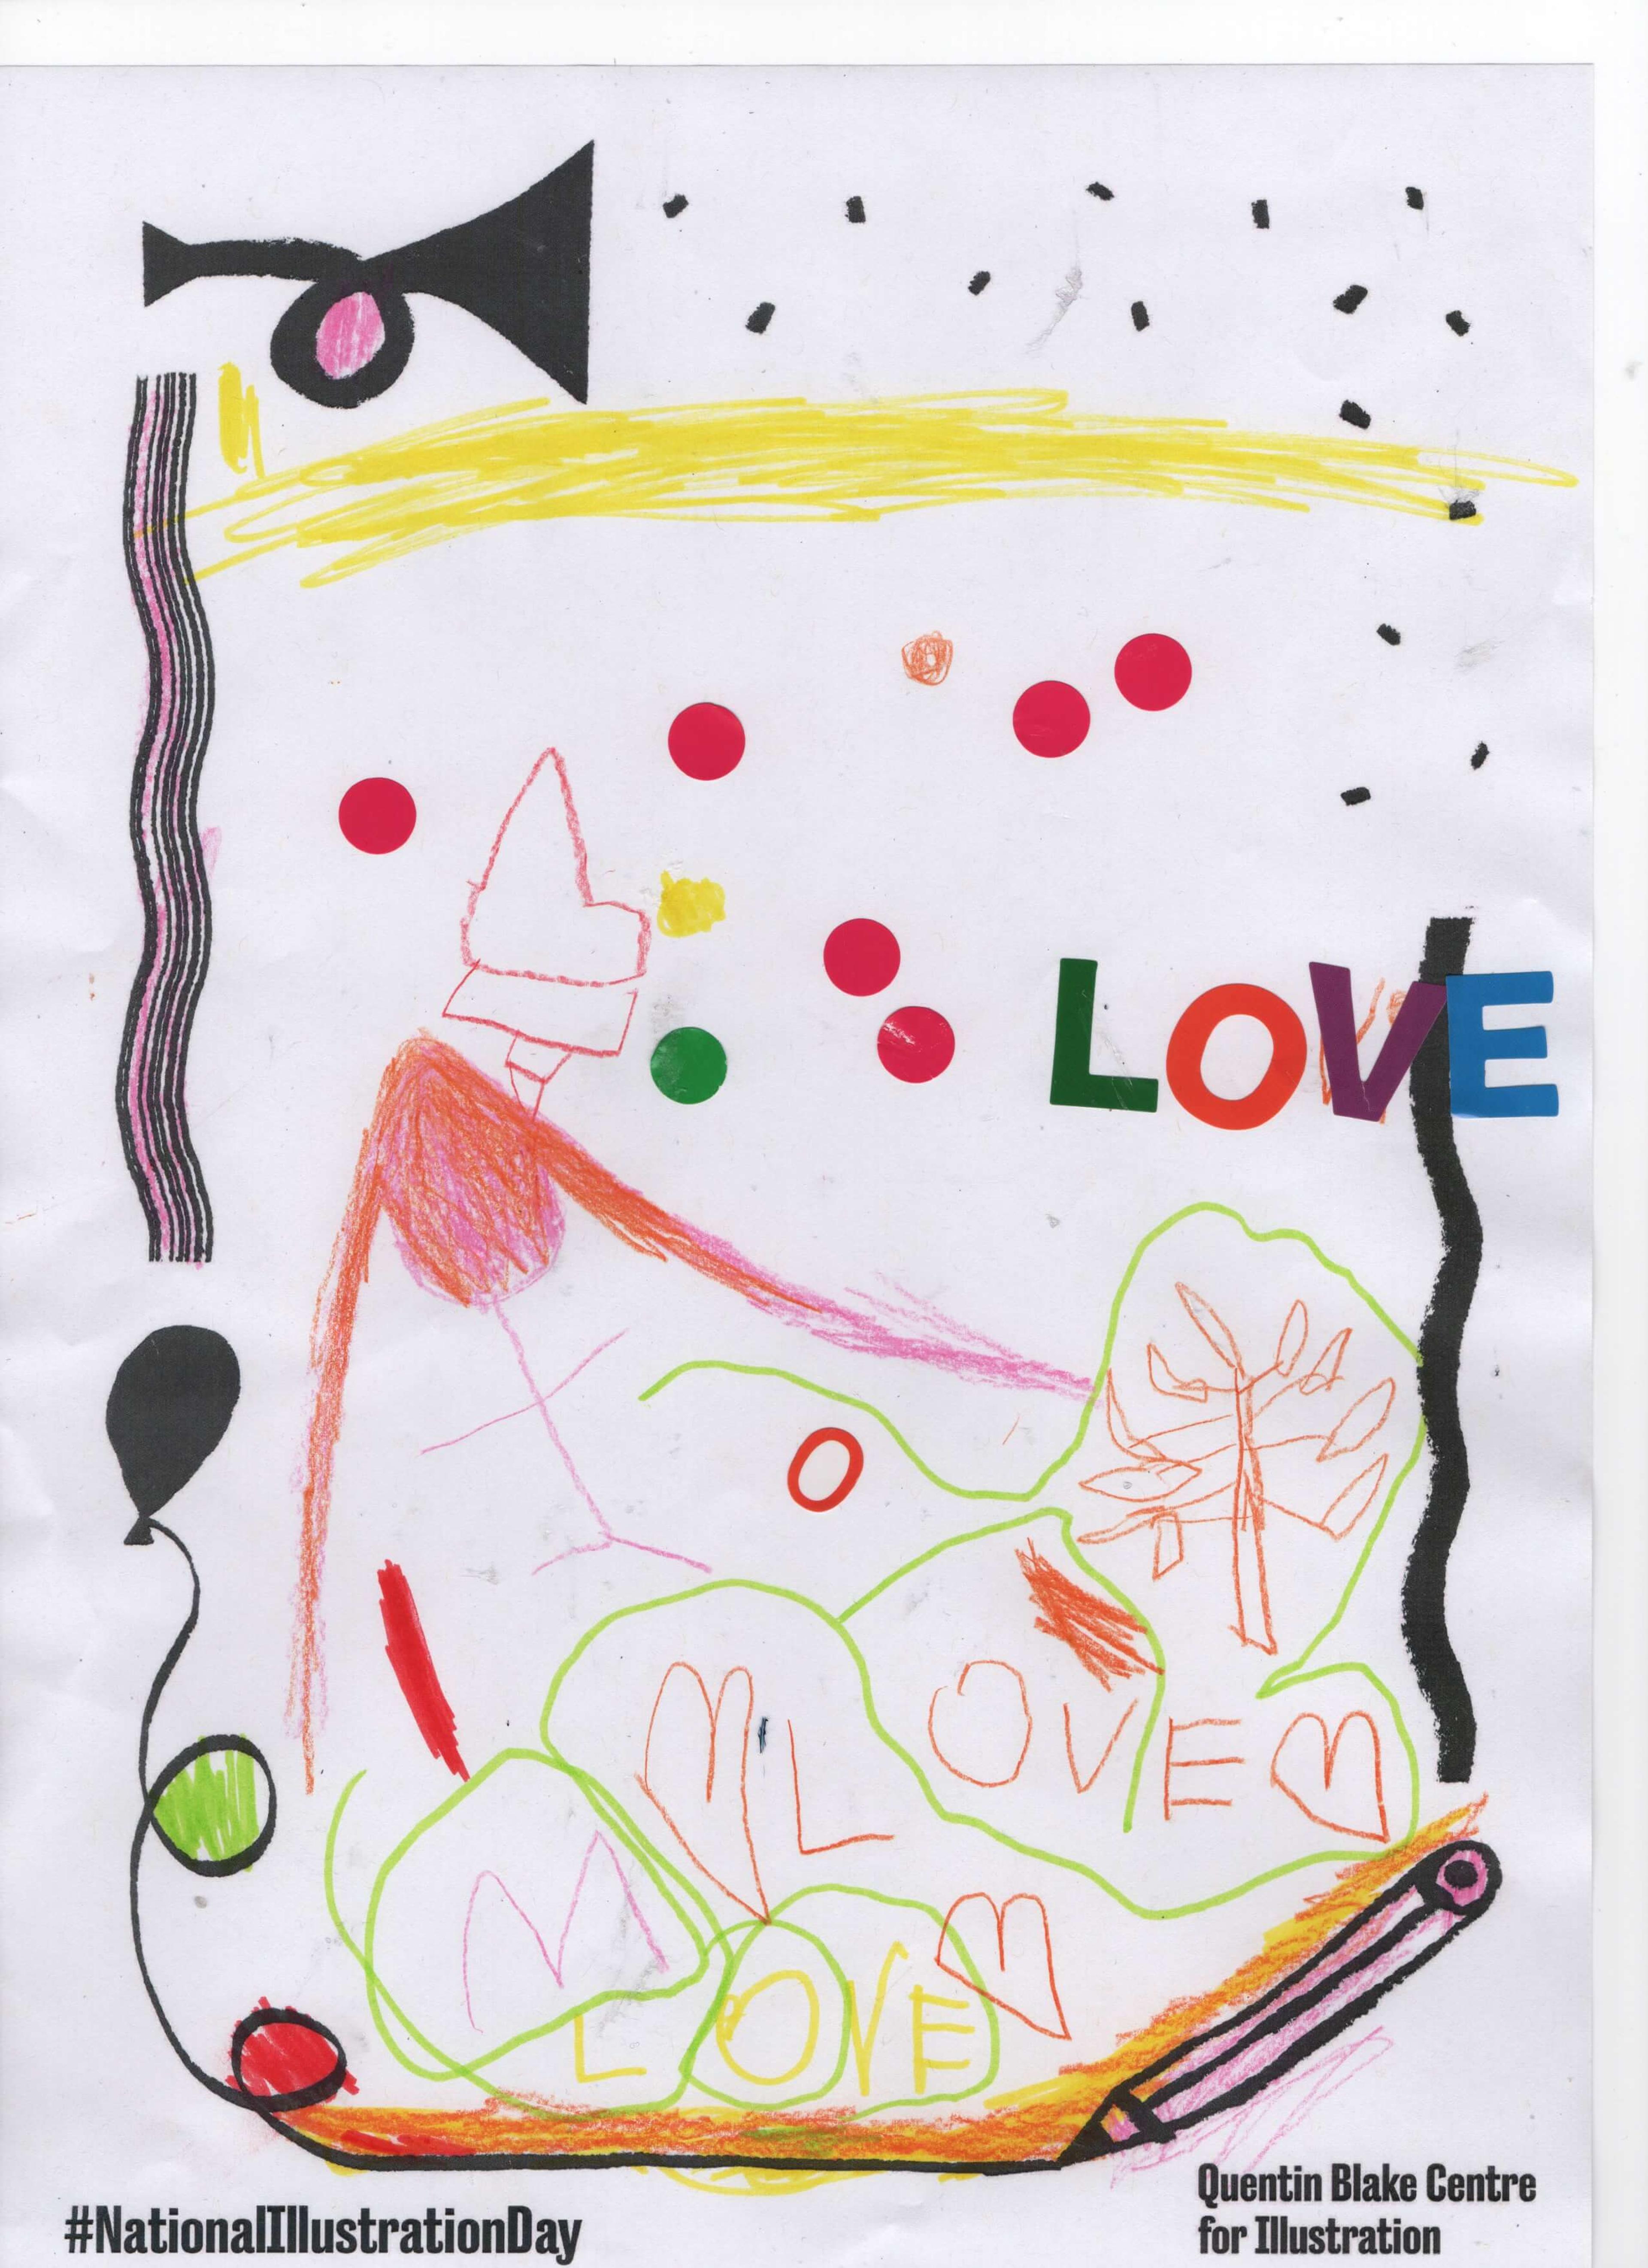 Abstract outlines made using coloured pencils. The picture includes the word "love" written several times, including once using colourful alphabet stickers.